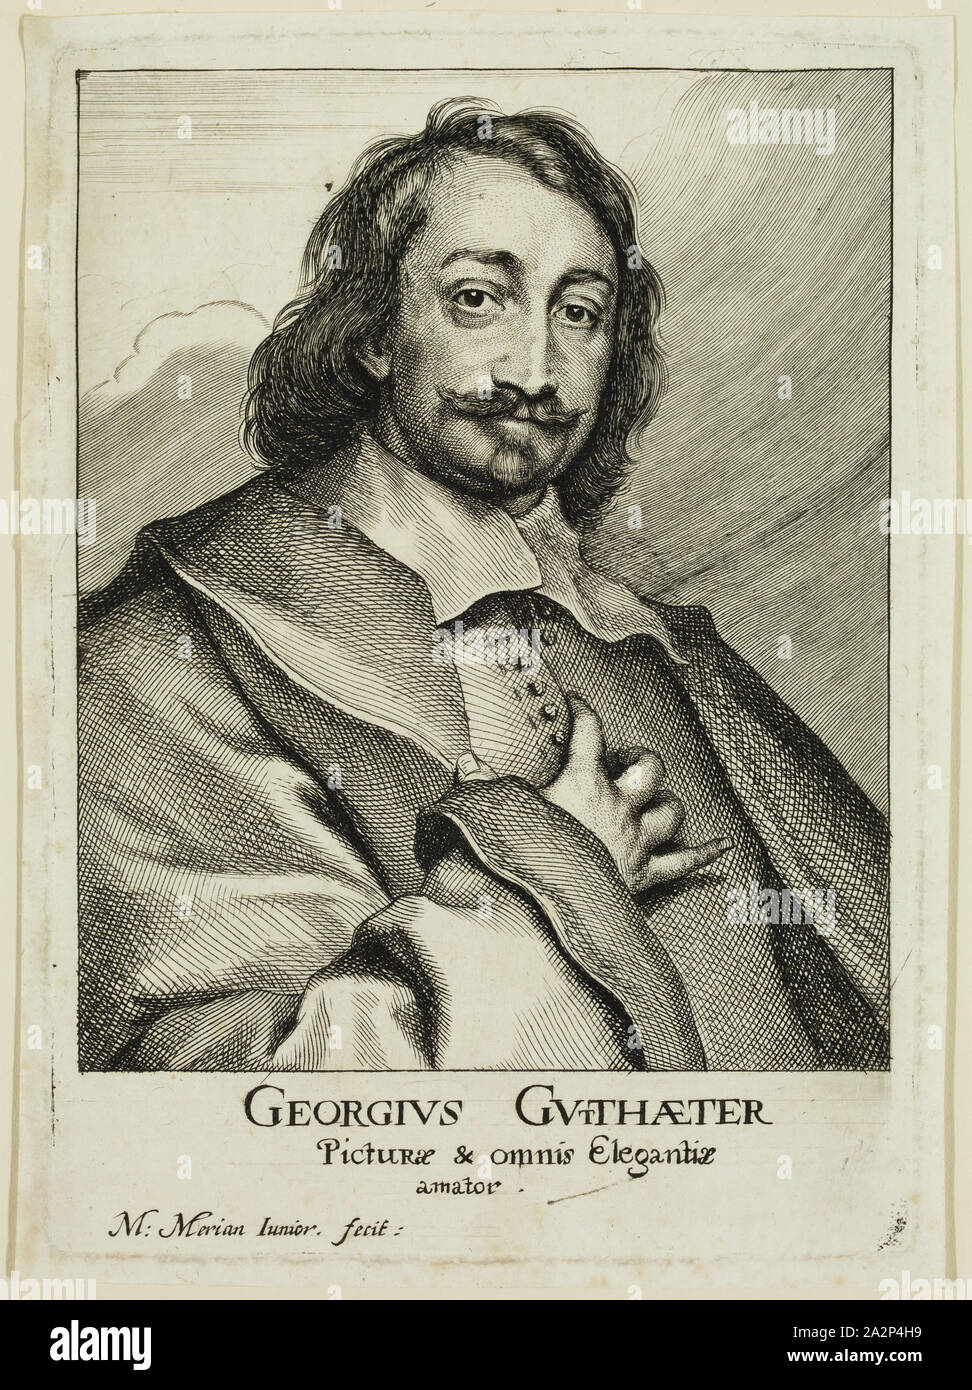 https://c8.alamy.com/comp/2A2P4H9/matthaus-merian-german-1621-1687-george-gutthaeter-merchant-and-art-connoisseur-of-nuremberg-mid-to-late-17th-century-engraving-printed-in-black-ink-on-laid-paper-plate-6-78-4-78-inches-175-124-cm-2A2P4H9.jpg